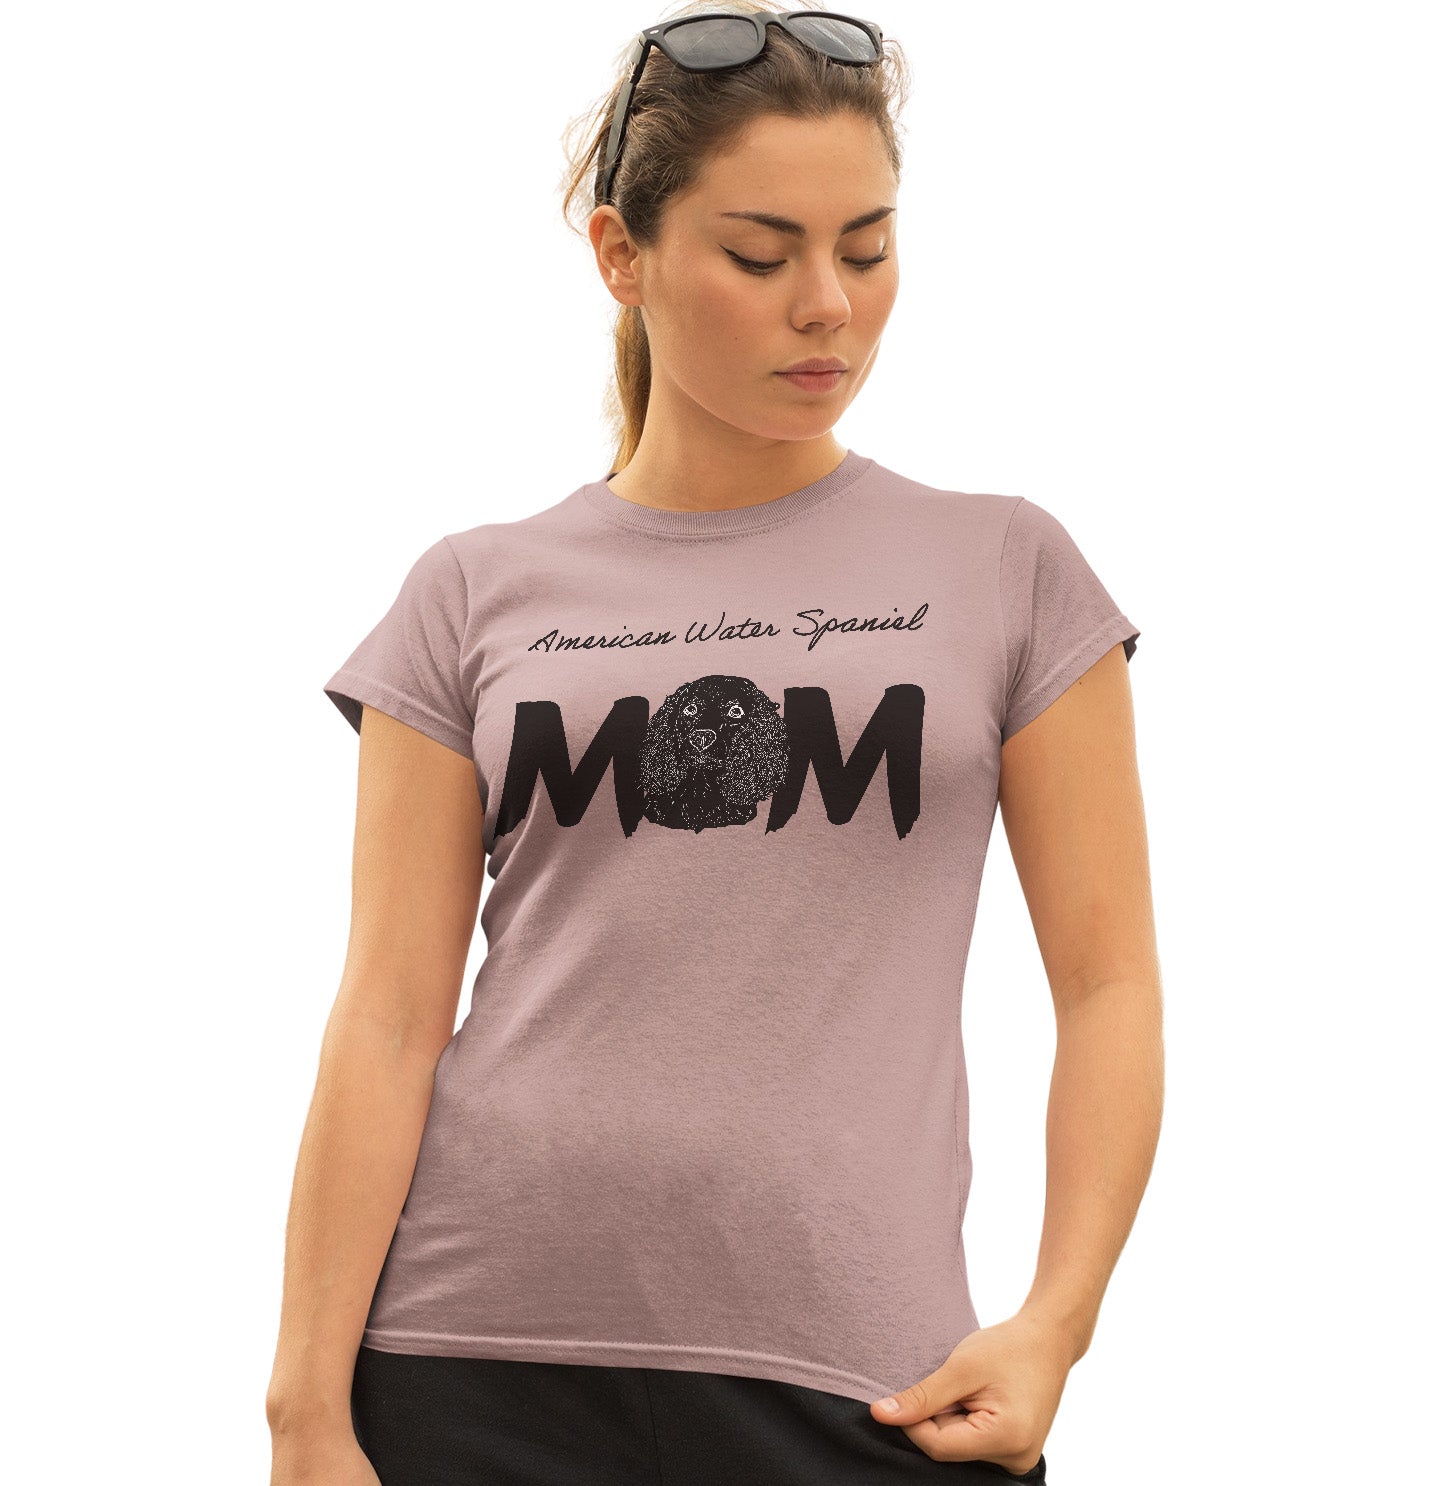 American Water Spaniel Breed Mom - Women's Fitted T-Shirt